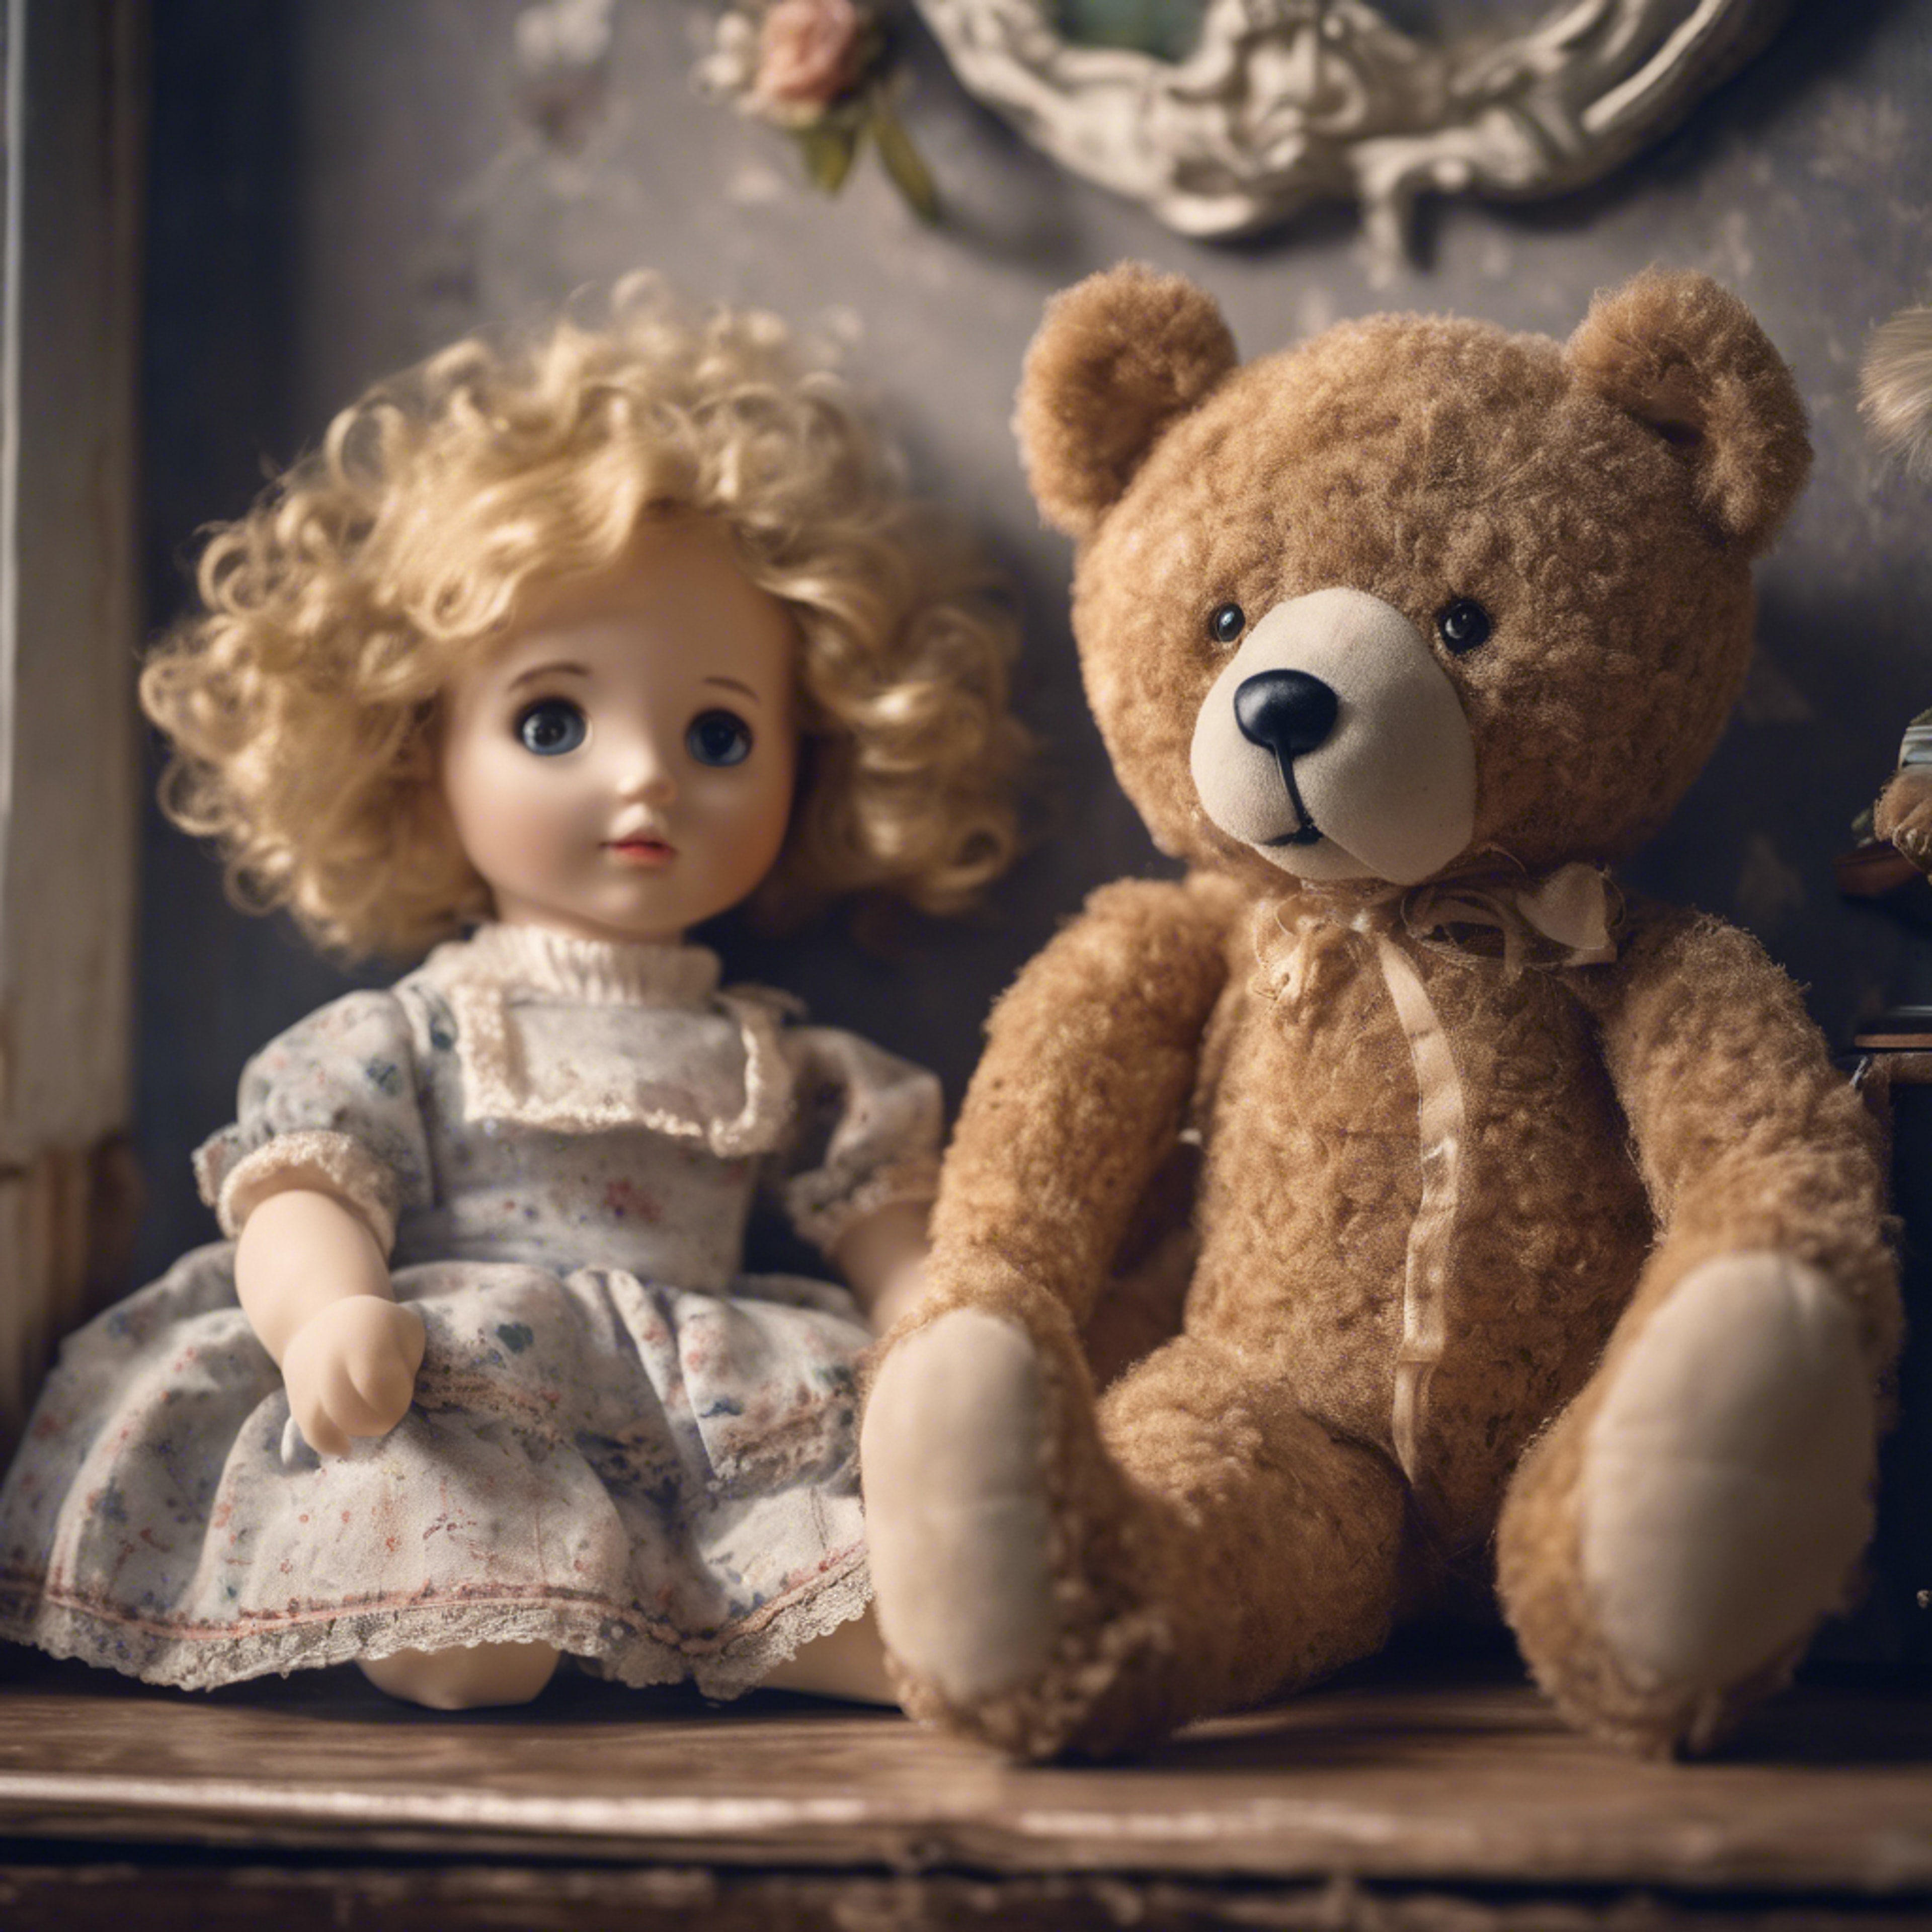 A stuffed teddy bear next to a porcelain doll in an old-fashioned child's room.壁紙[4cda63de3c9241699390]